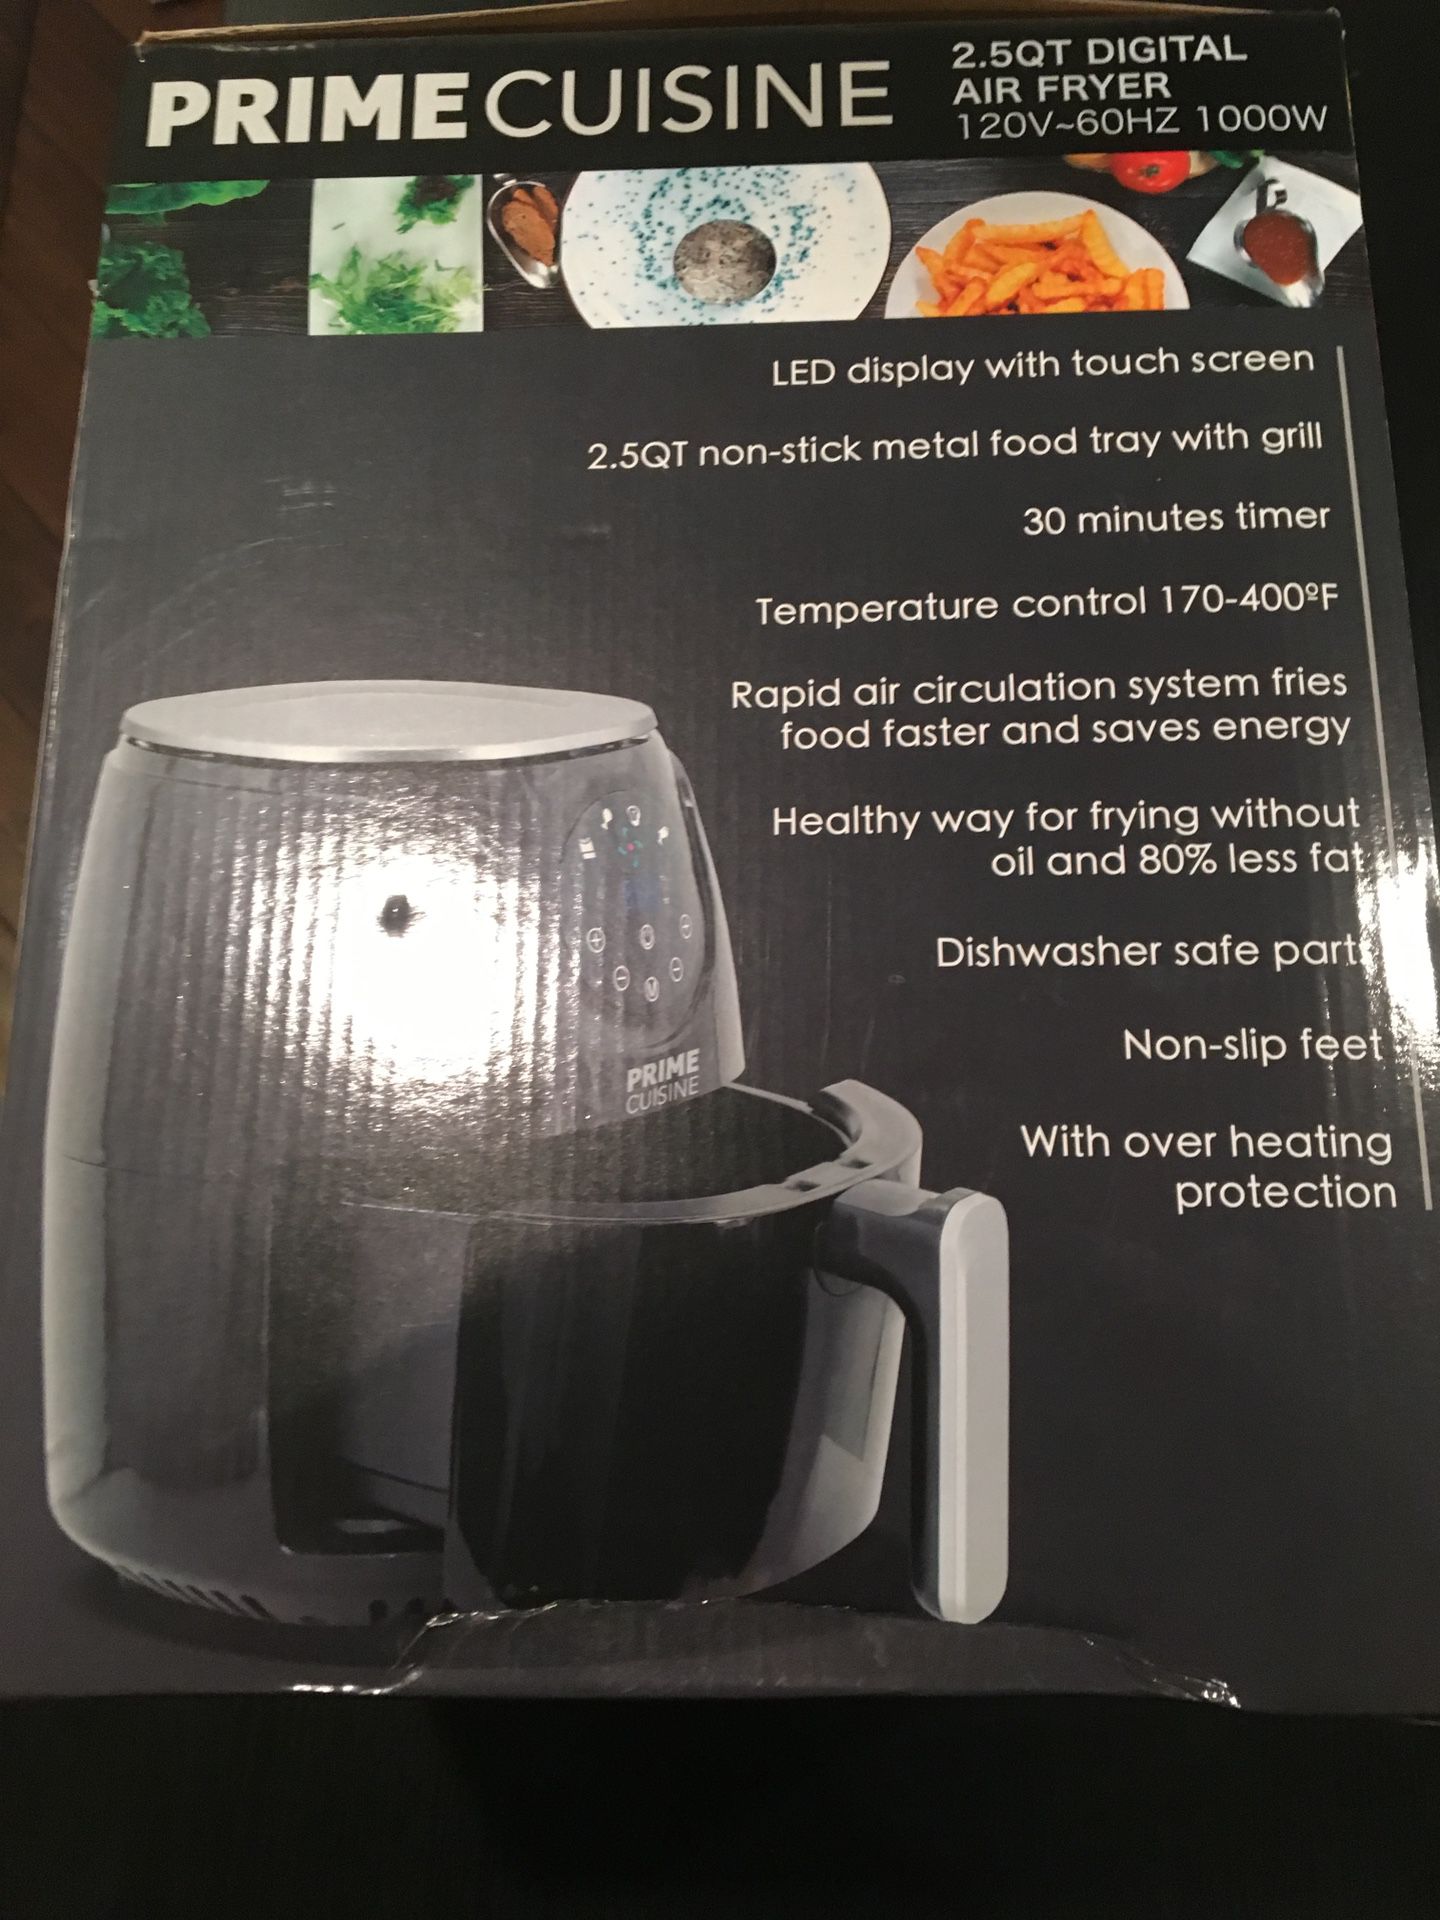 Beautiful 6 Quart Touchscreen Air Fryer, Black Sesame by Drew Barrymore  Price is firm $50 for Sale in El Cajon, CA - OfferUp